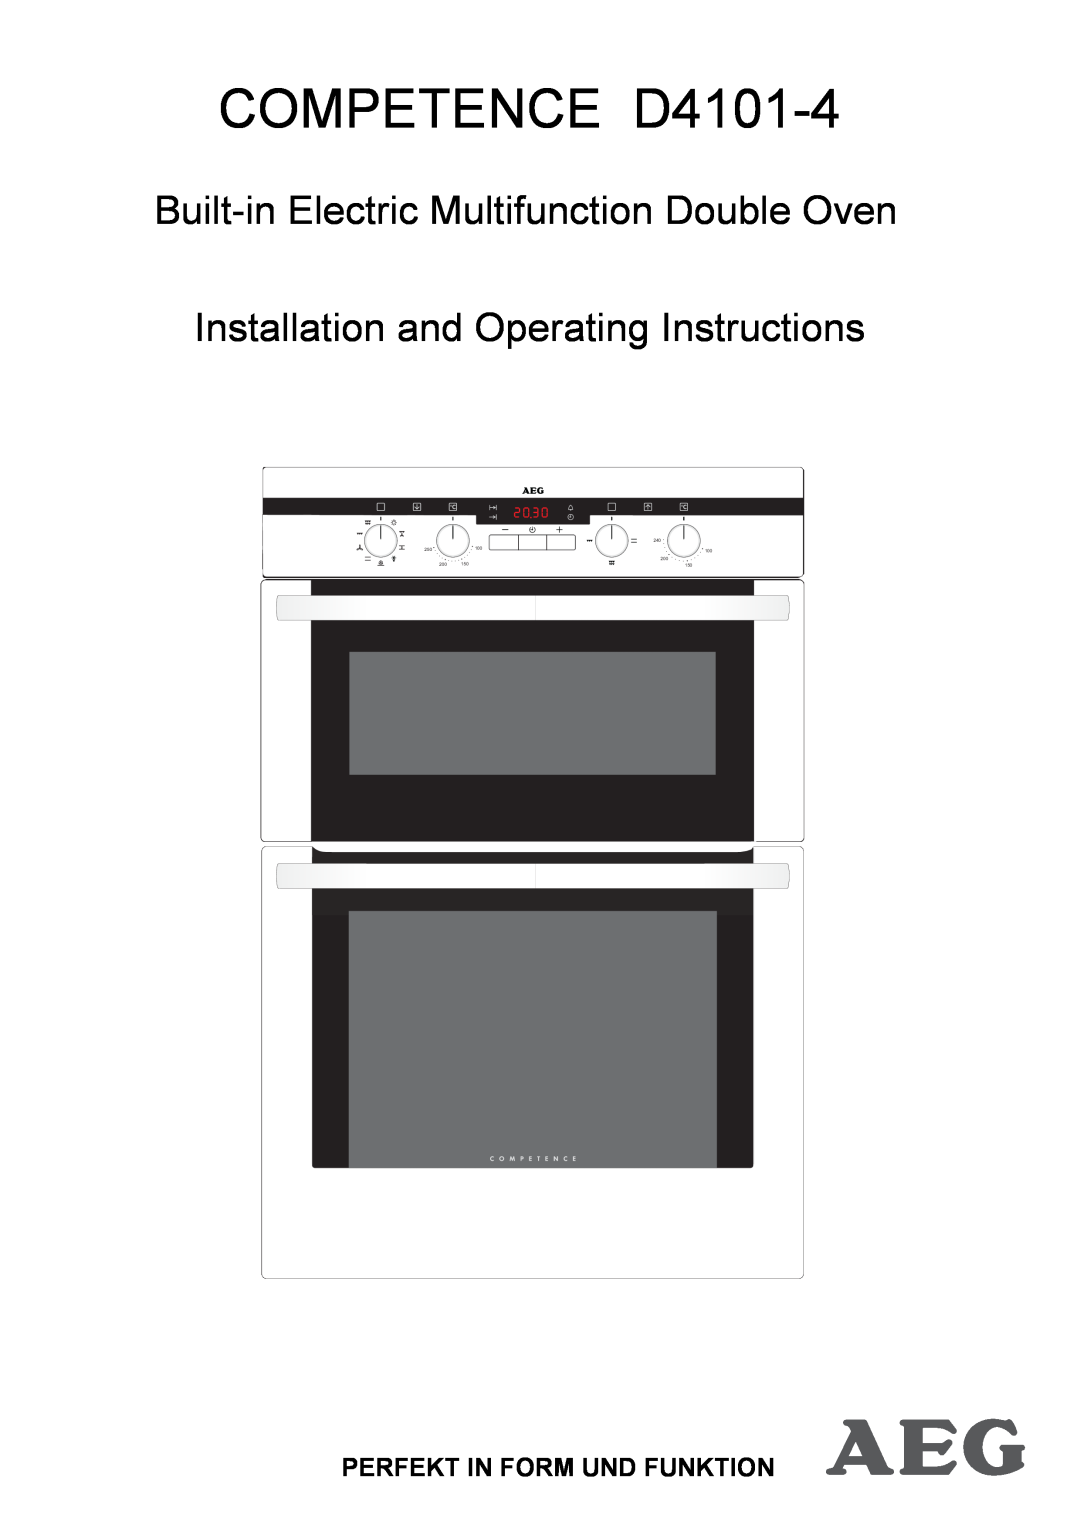 Electrolux operating instructions Perfekt In Form Und Funktion, COMPETENCE D4101-4, 250100, 240 